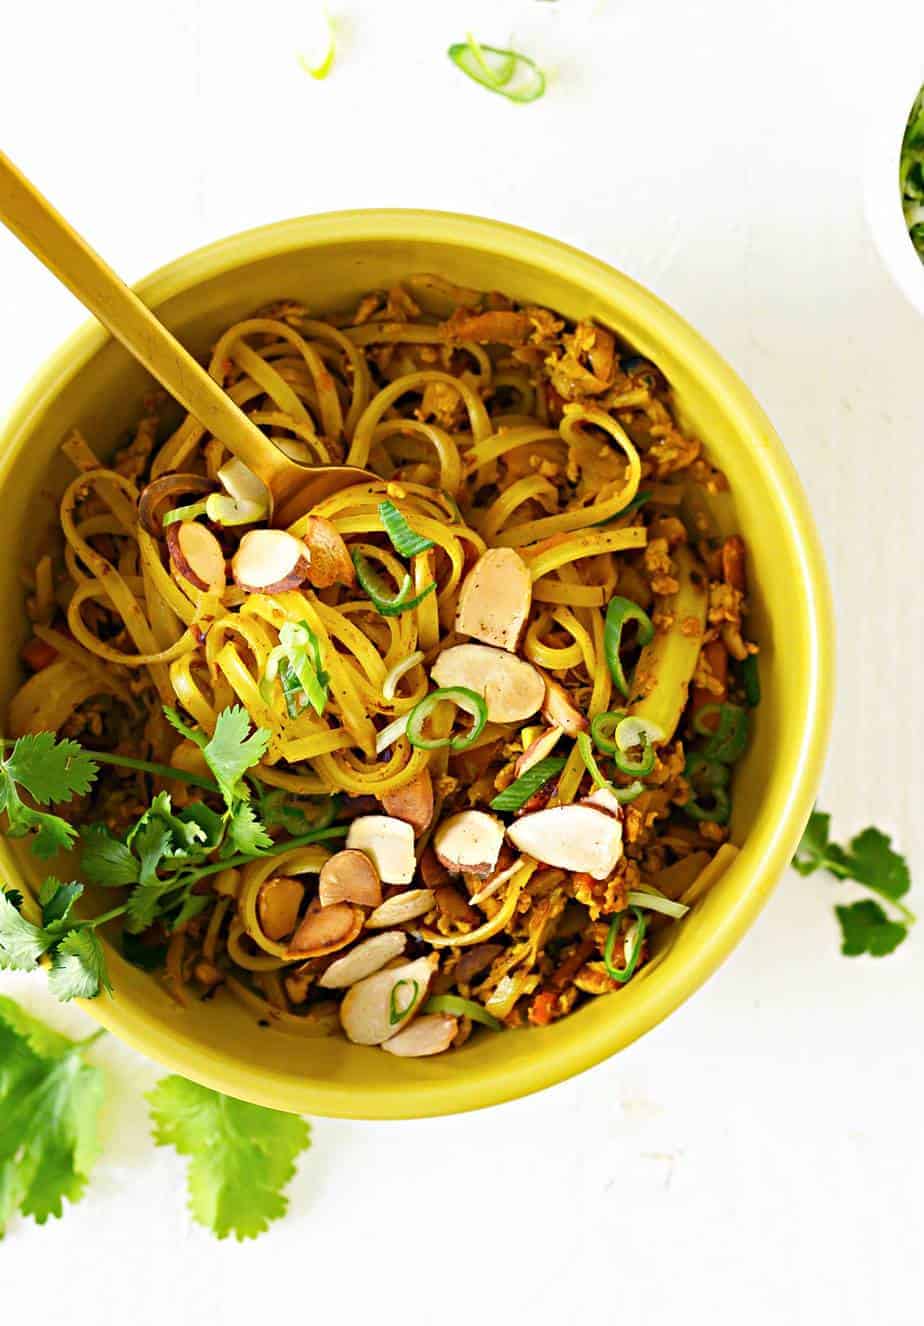 Pan-Fried Curry Noodles (or Curried Pad Thai) Recipe (via thepigandquill.com) #glutenfree #vegetarian #plantbased 